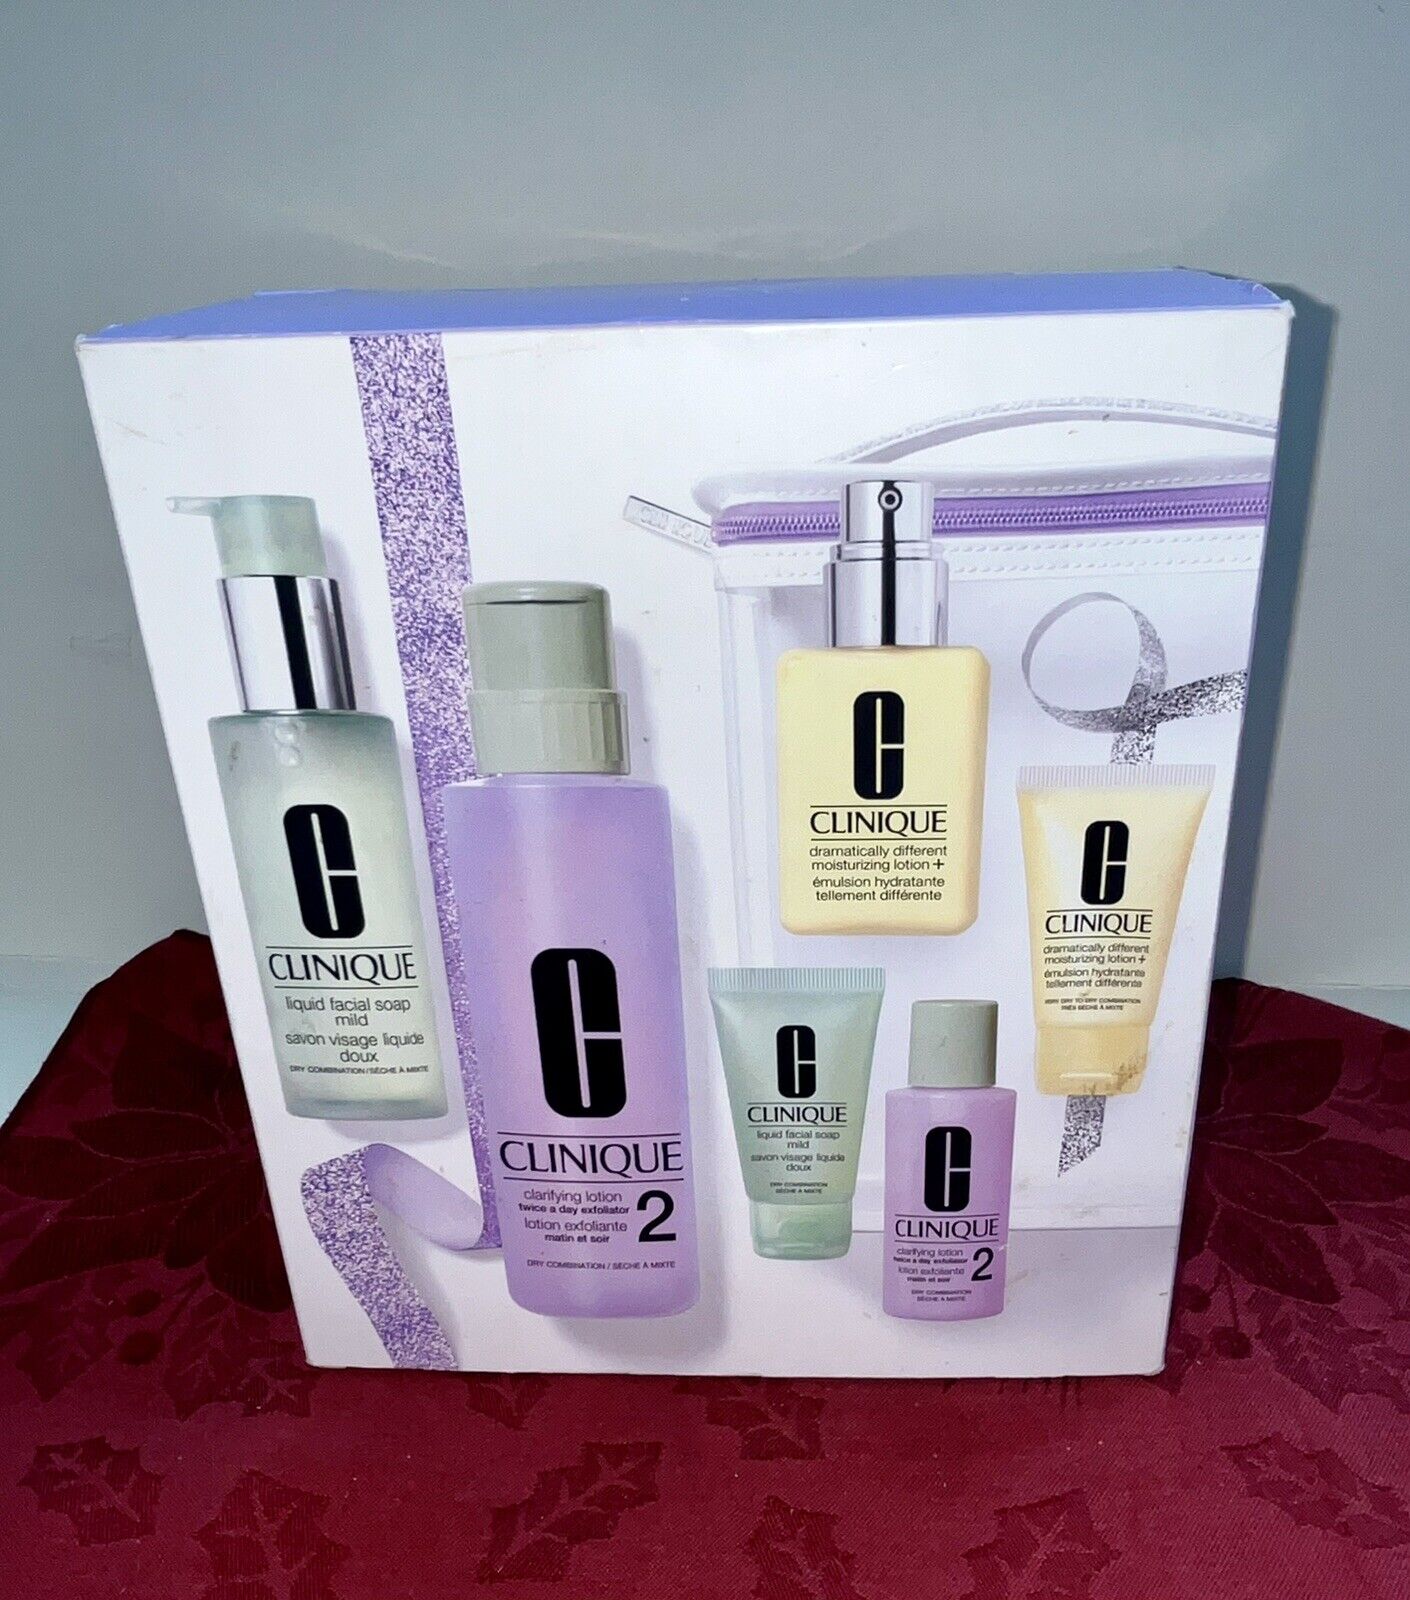 CLINIQUE GREAT SKIN ANYWHERE BOXED 6 PC SET FACIAL CARE FOR CLEAR GLOWING SKIN